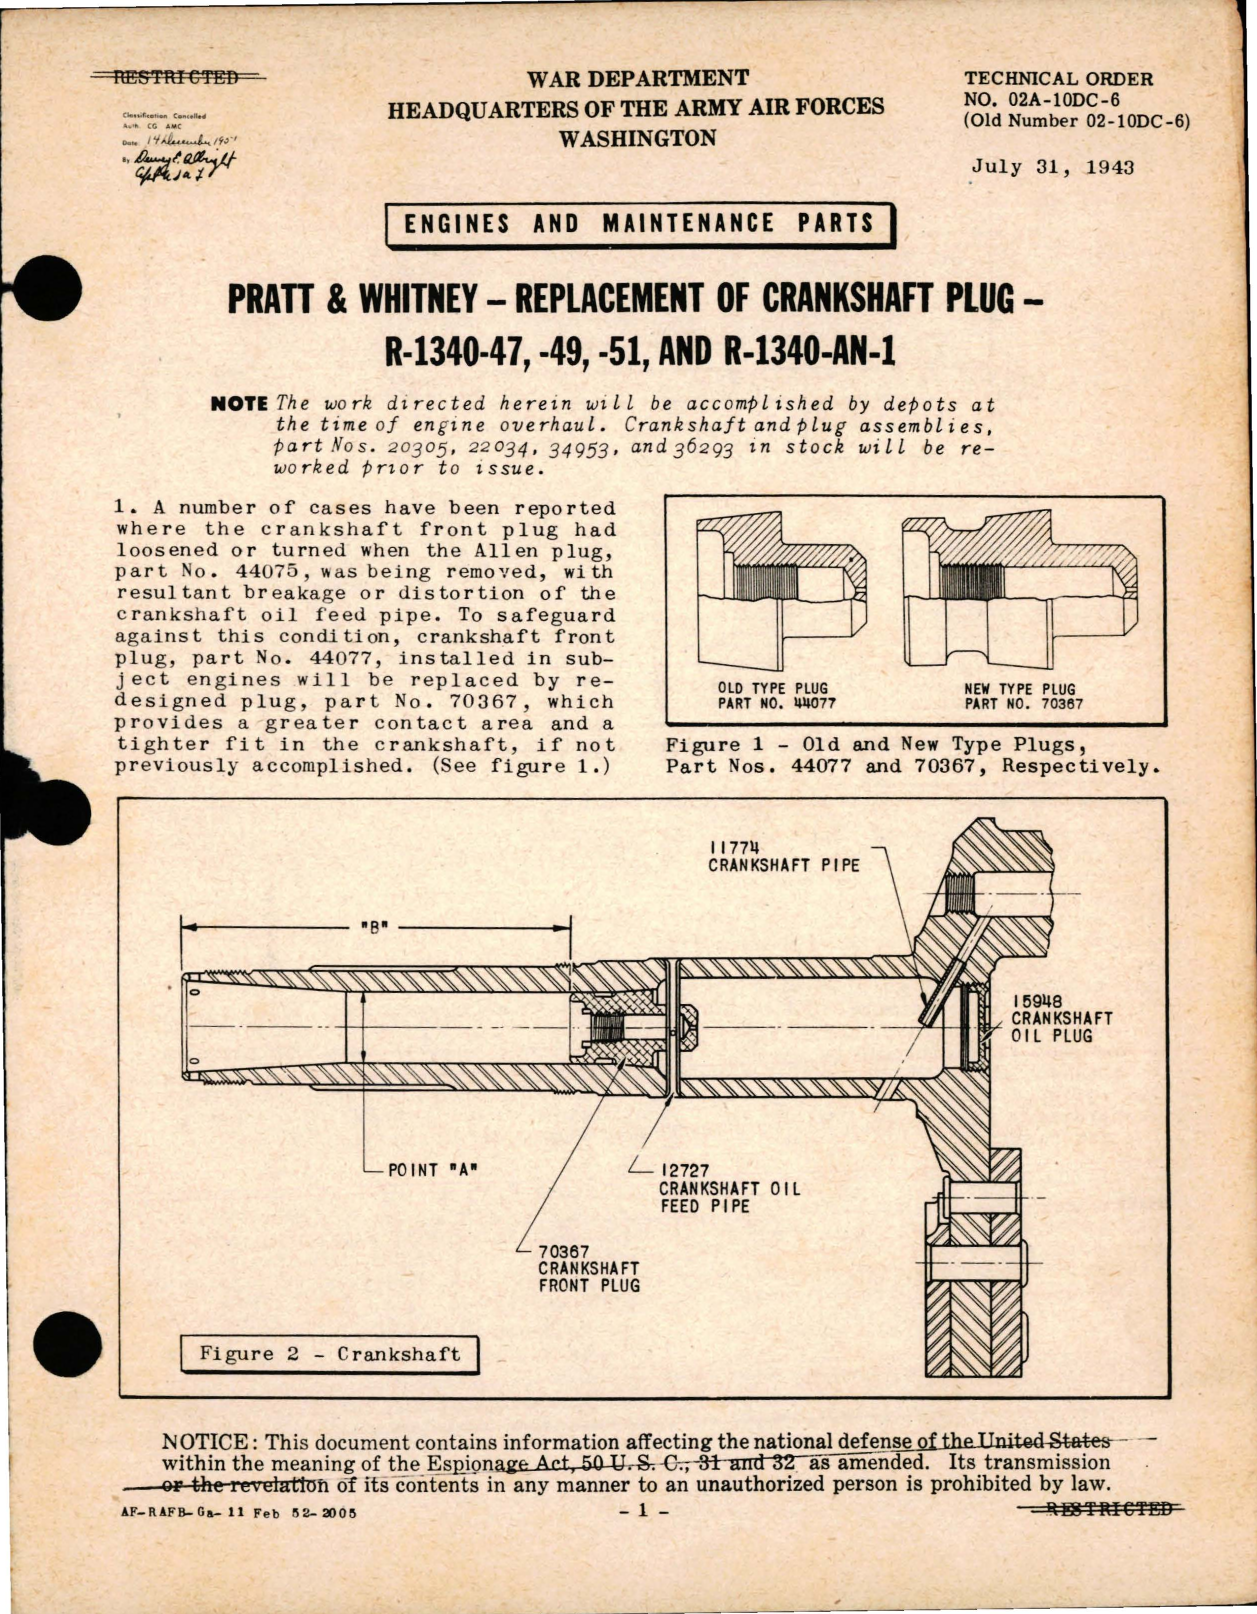 Sample page 1 from AirCorps Library document: Replacement of Crankshaft Plug on R-1340-47, R-1340-49, R-1340-51, and R-1340-AN-1